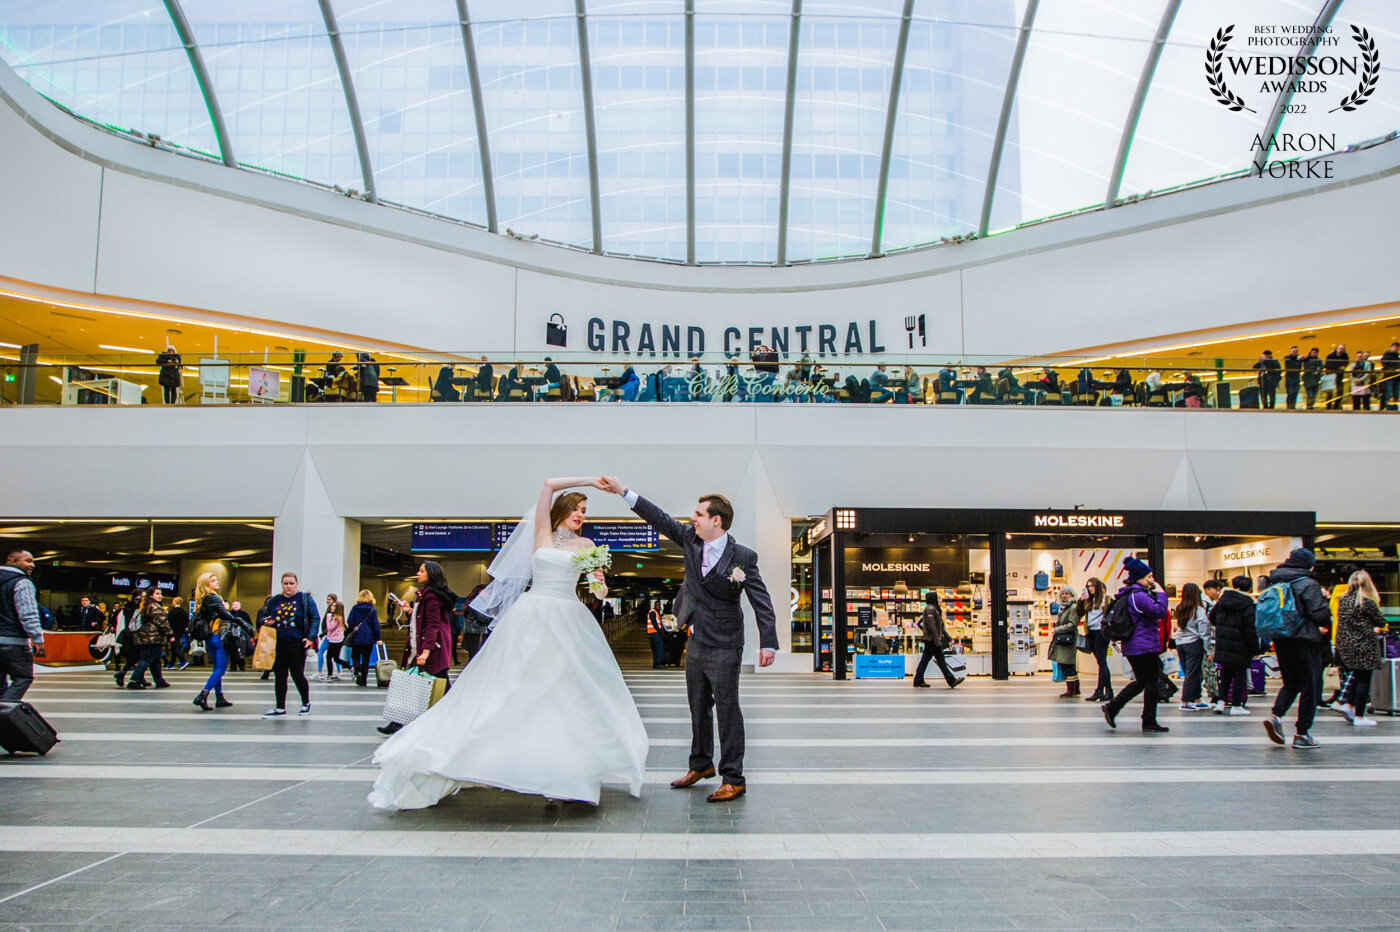 This image was a first at New Street Station in Birmingham! The couple were married in a venue near the station so we decided to take some shots inside Grand Central. It was such an amazing experience and I will definitely do it again when I get the chance!